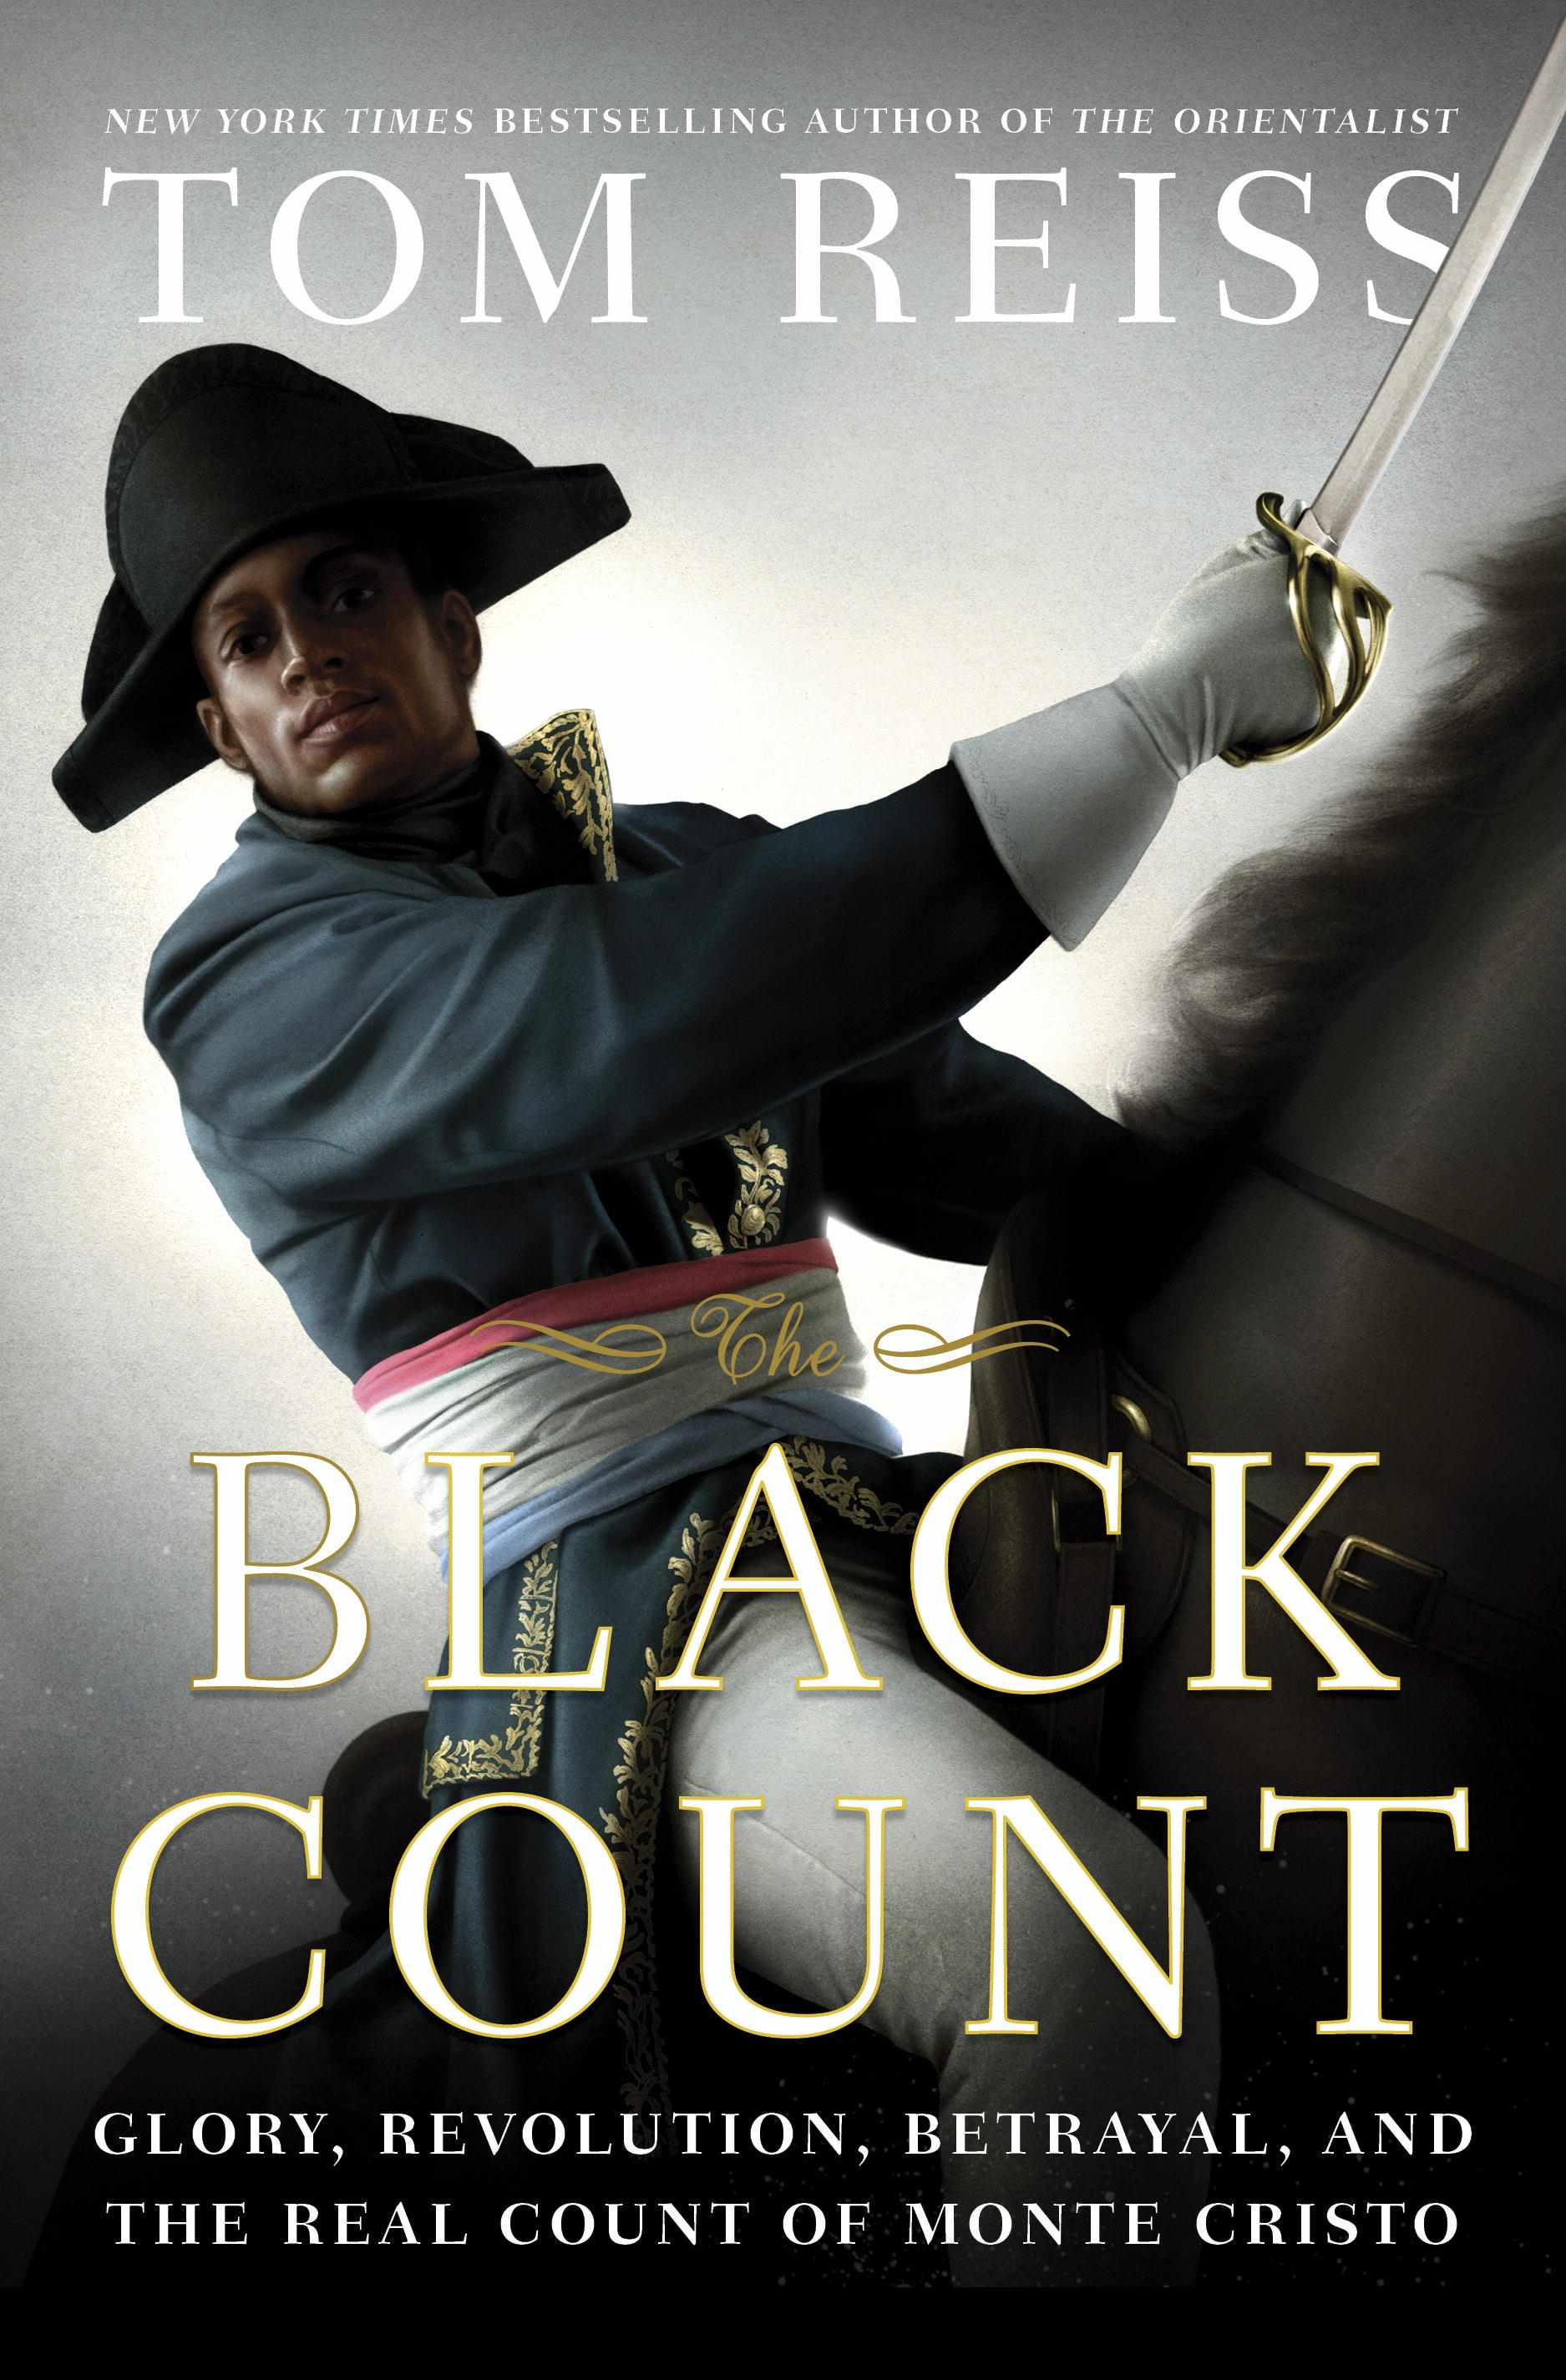 NDG Bookshelf: The Real Count of Monte Cristo was a Black Frenchman?